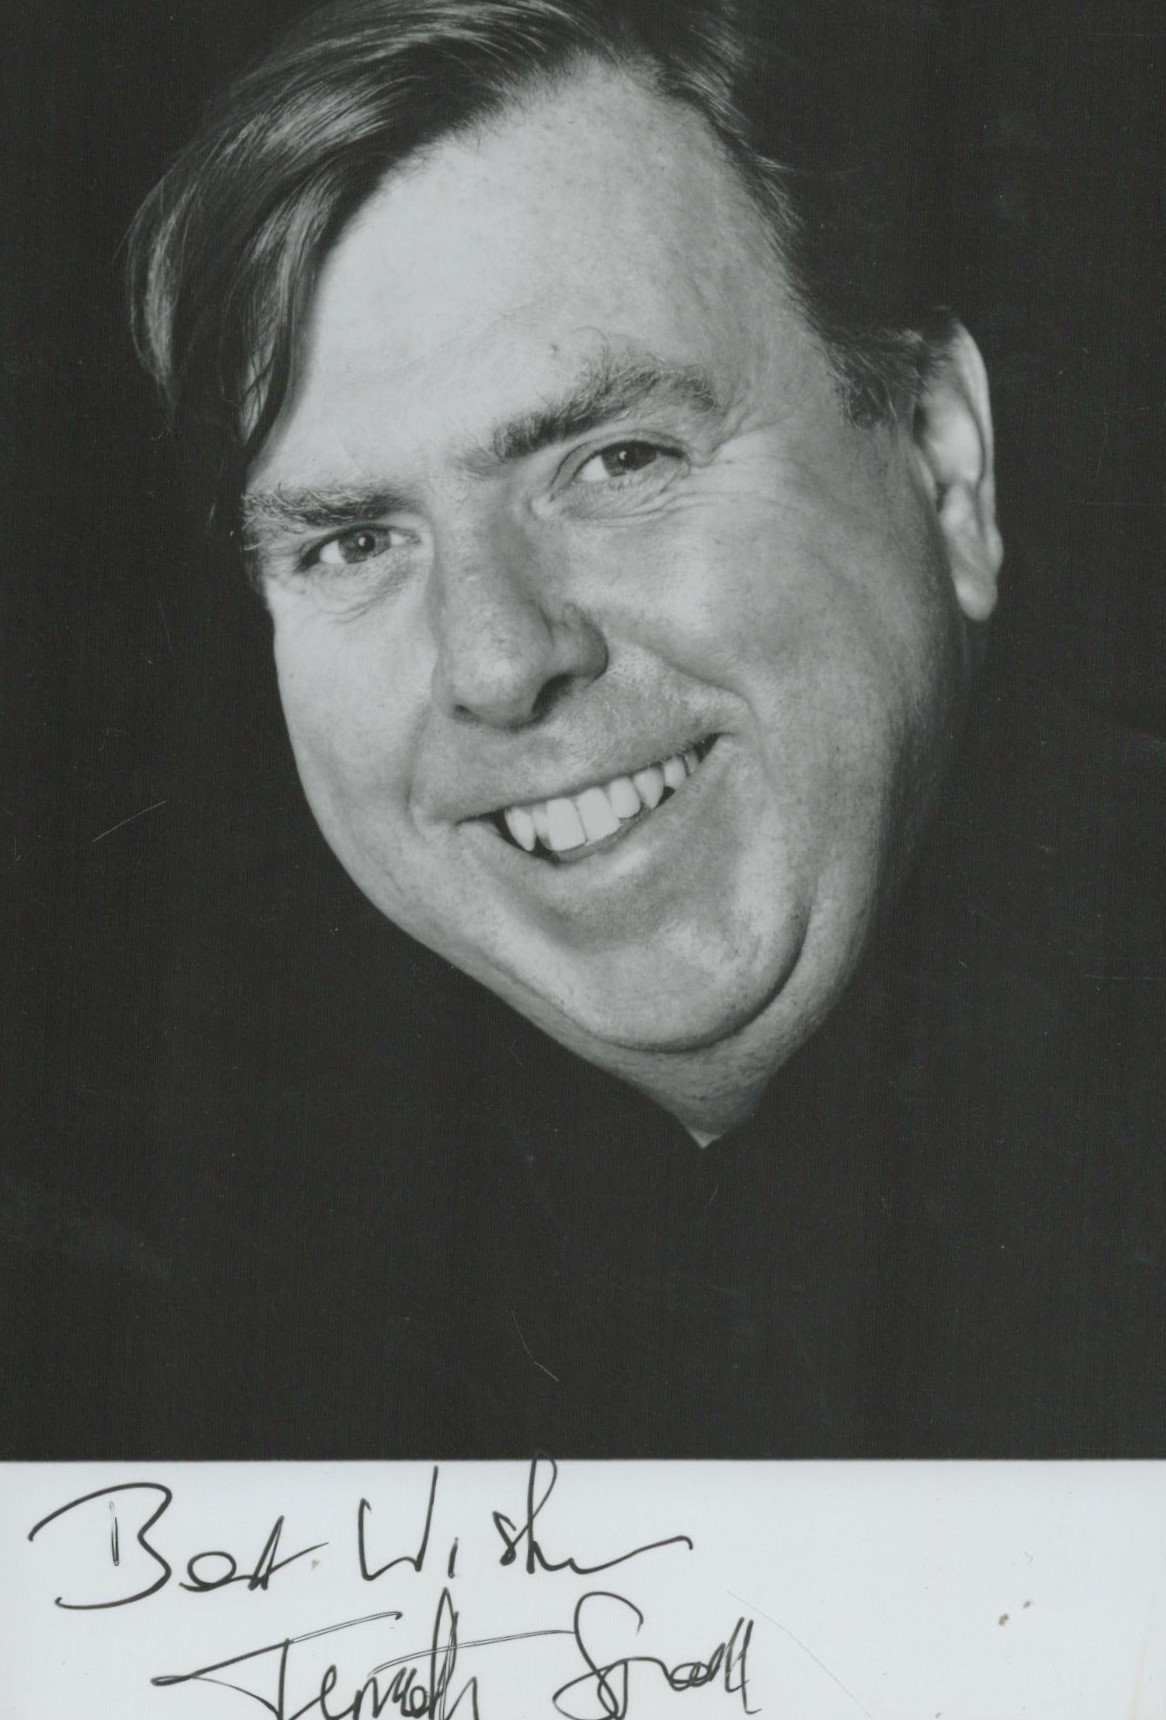 Timothy Spall signed black & white photo 6x4 Inch. Is an English actor and presenter. Spall gained